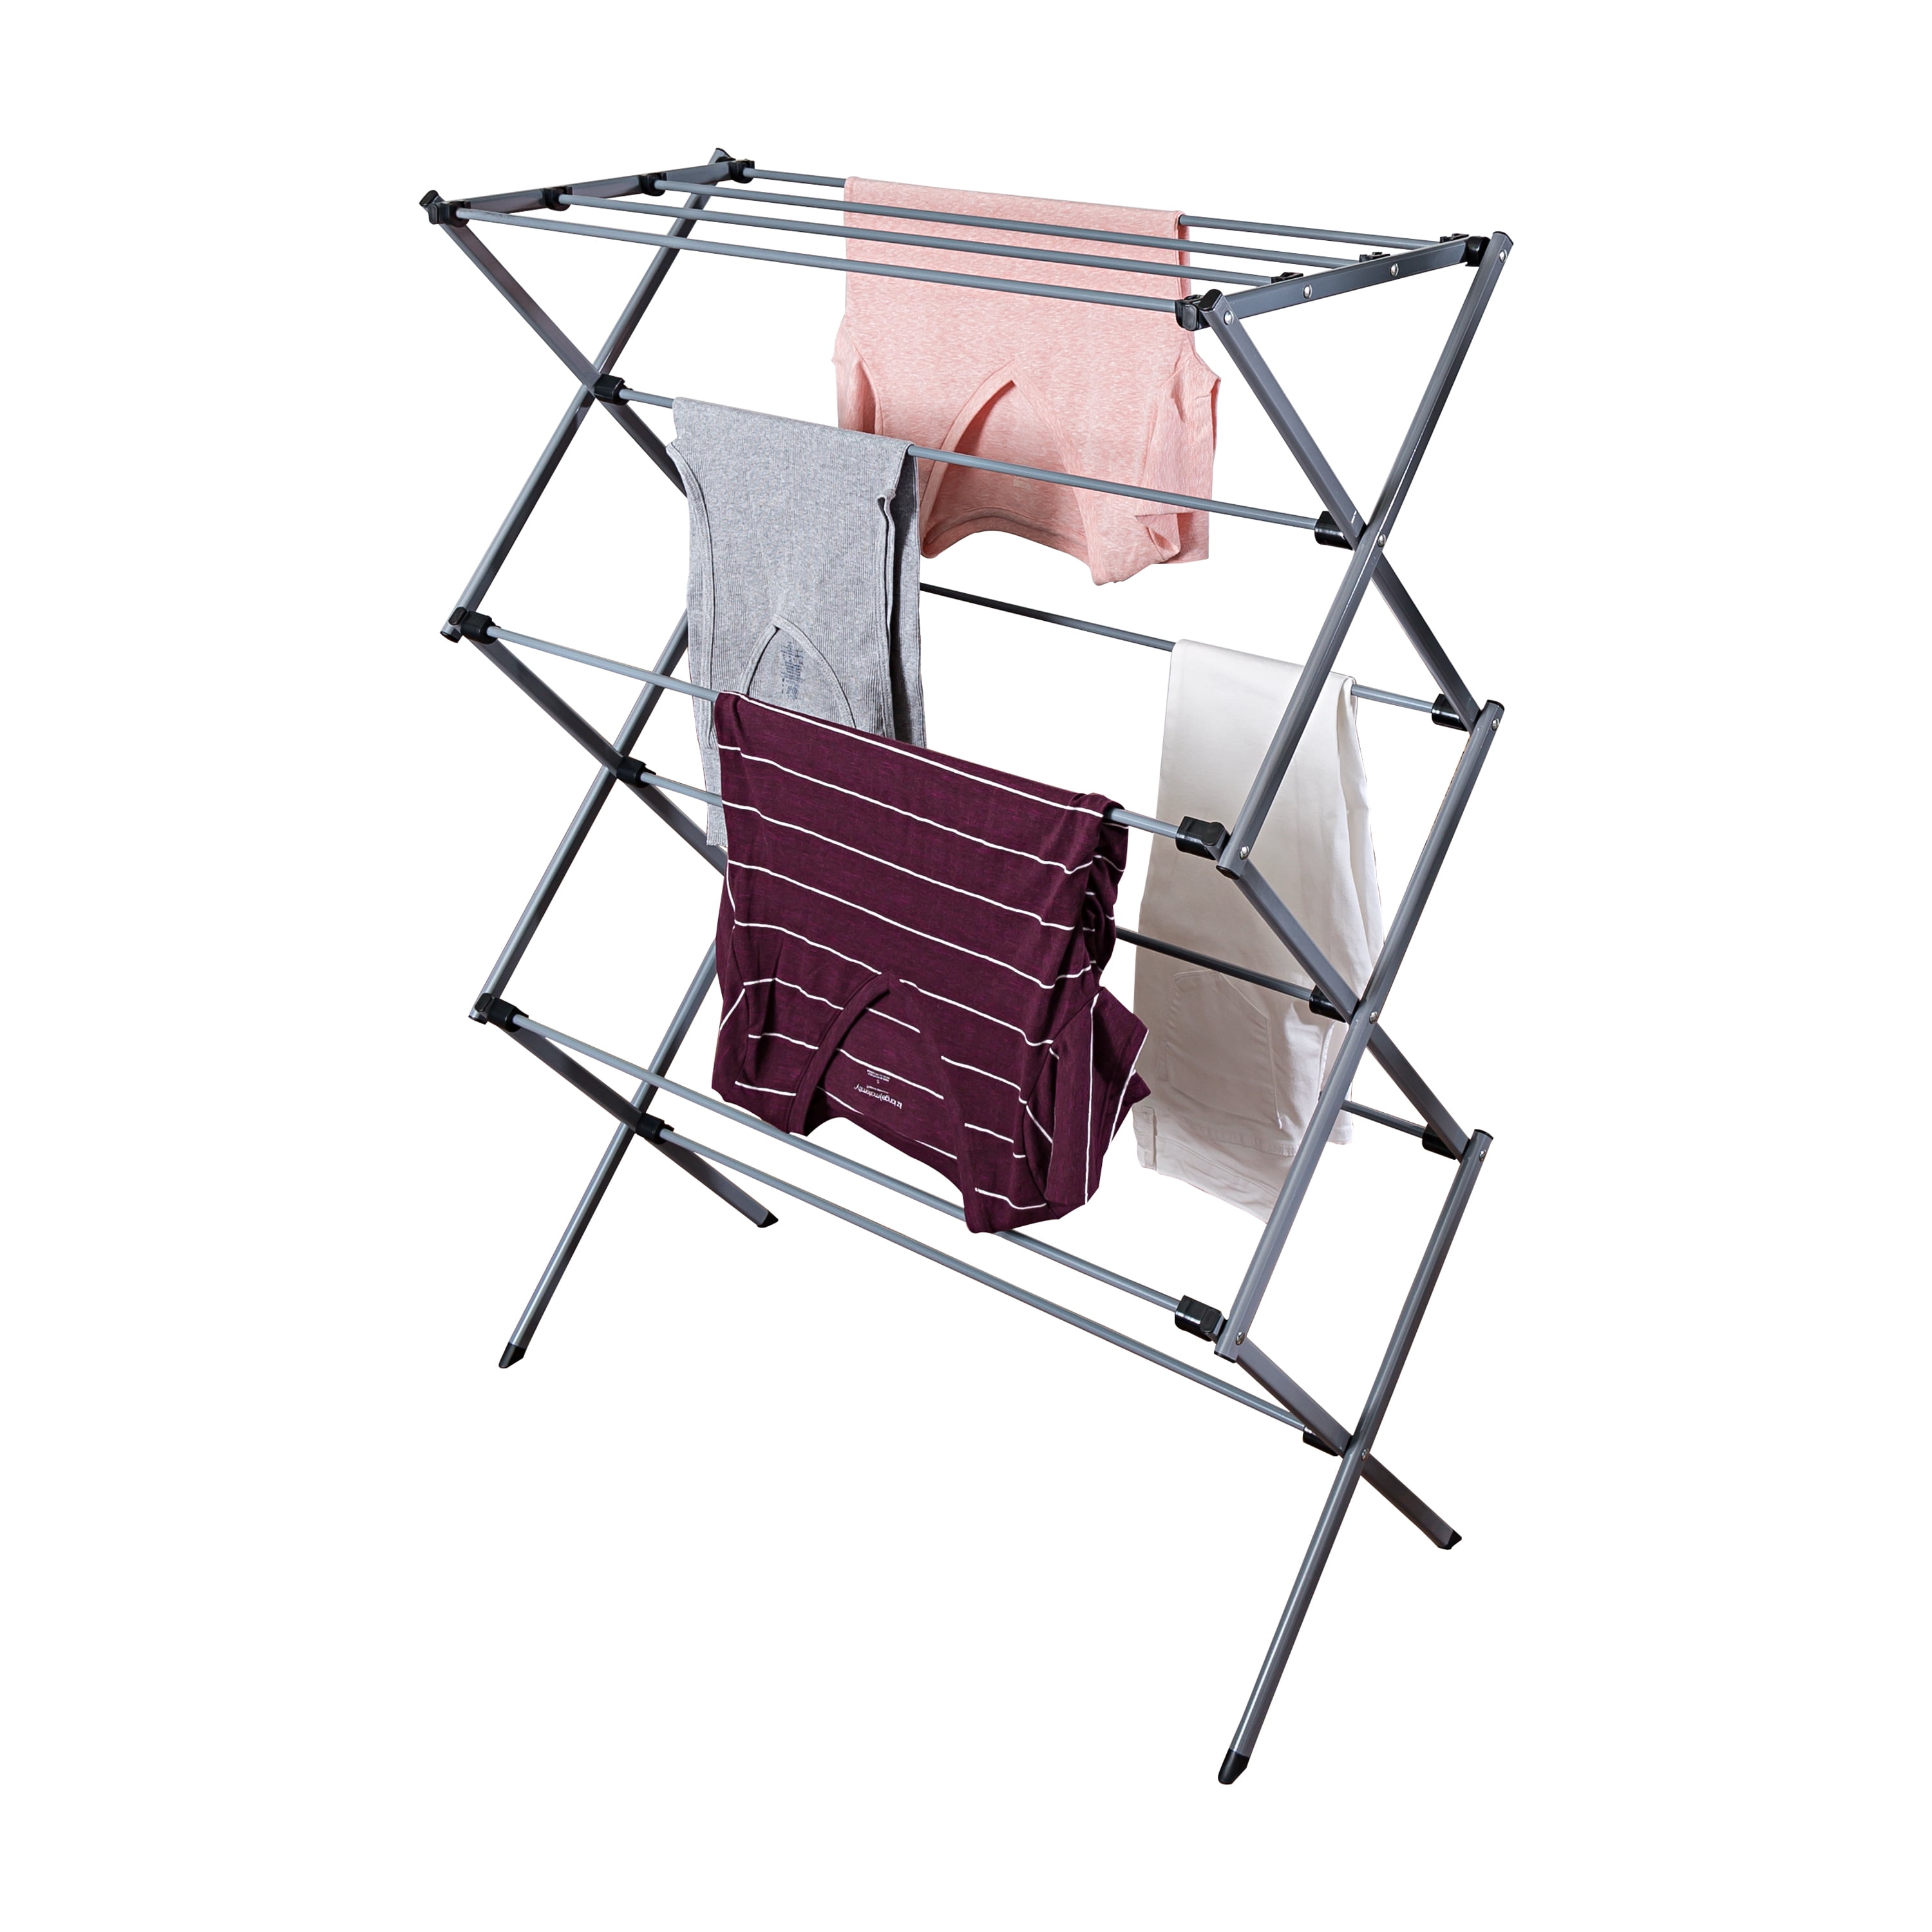 Clothes Drying Racks Stainless Steel Laundry Drying Rack Heavy Duty  Colla New